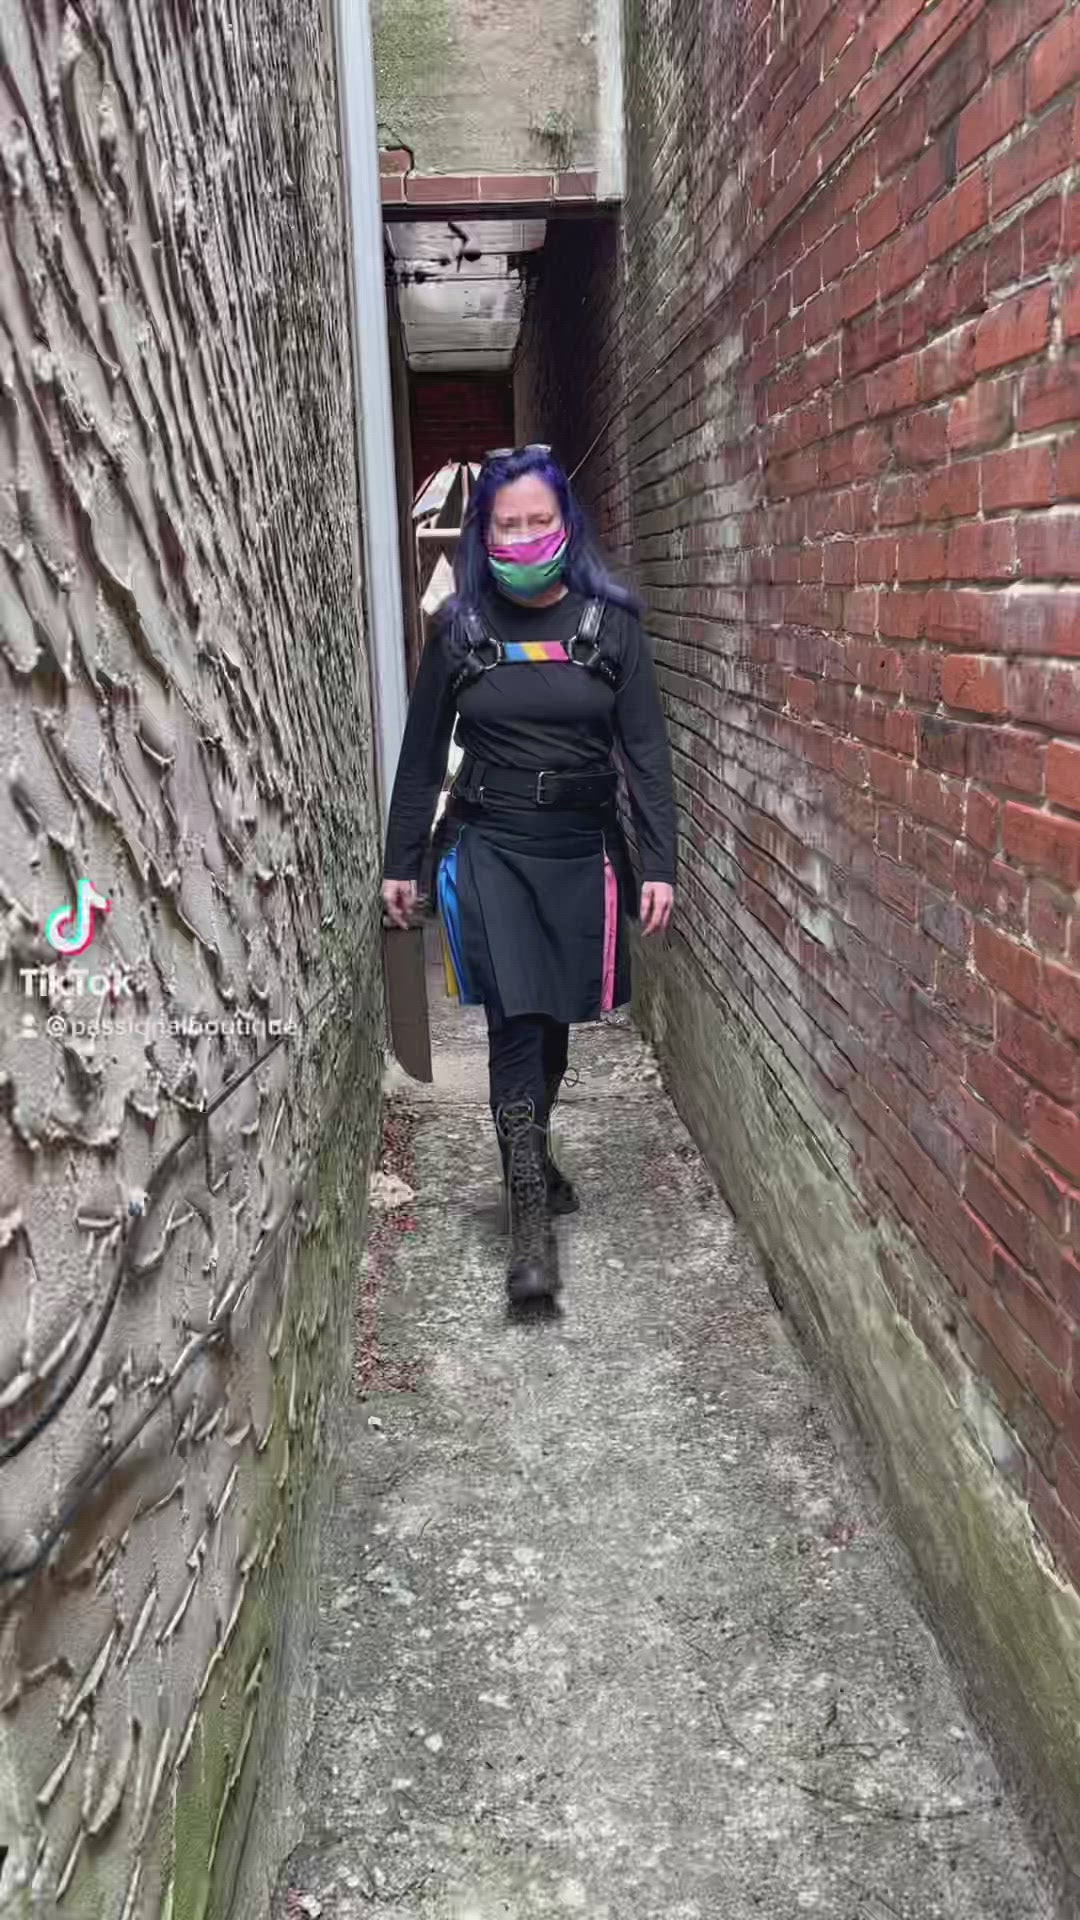 Model walks through alleyway, spins to show off the Pansexual Pride Flag Heritage Kilt.